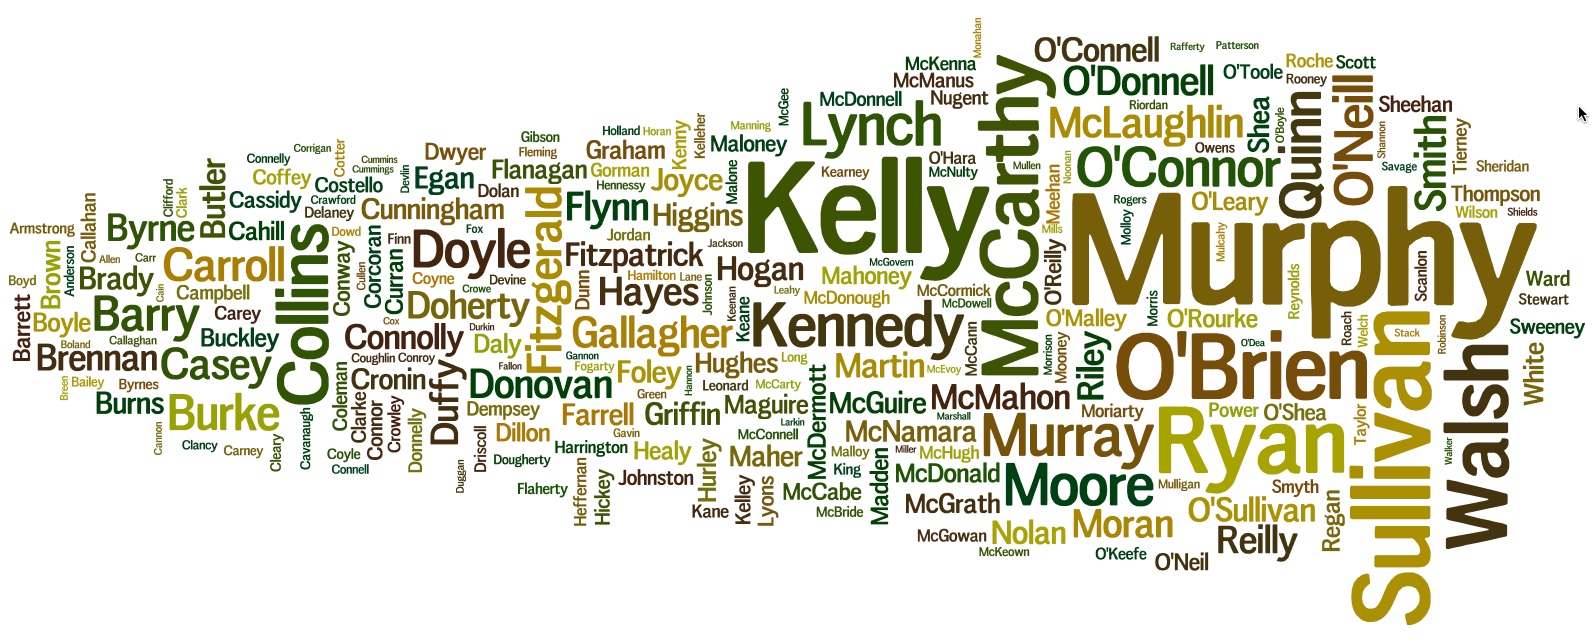 Top 250 Irish Surnames Among our Readers.